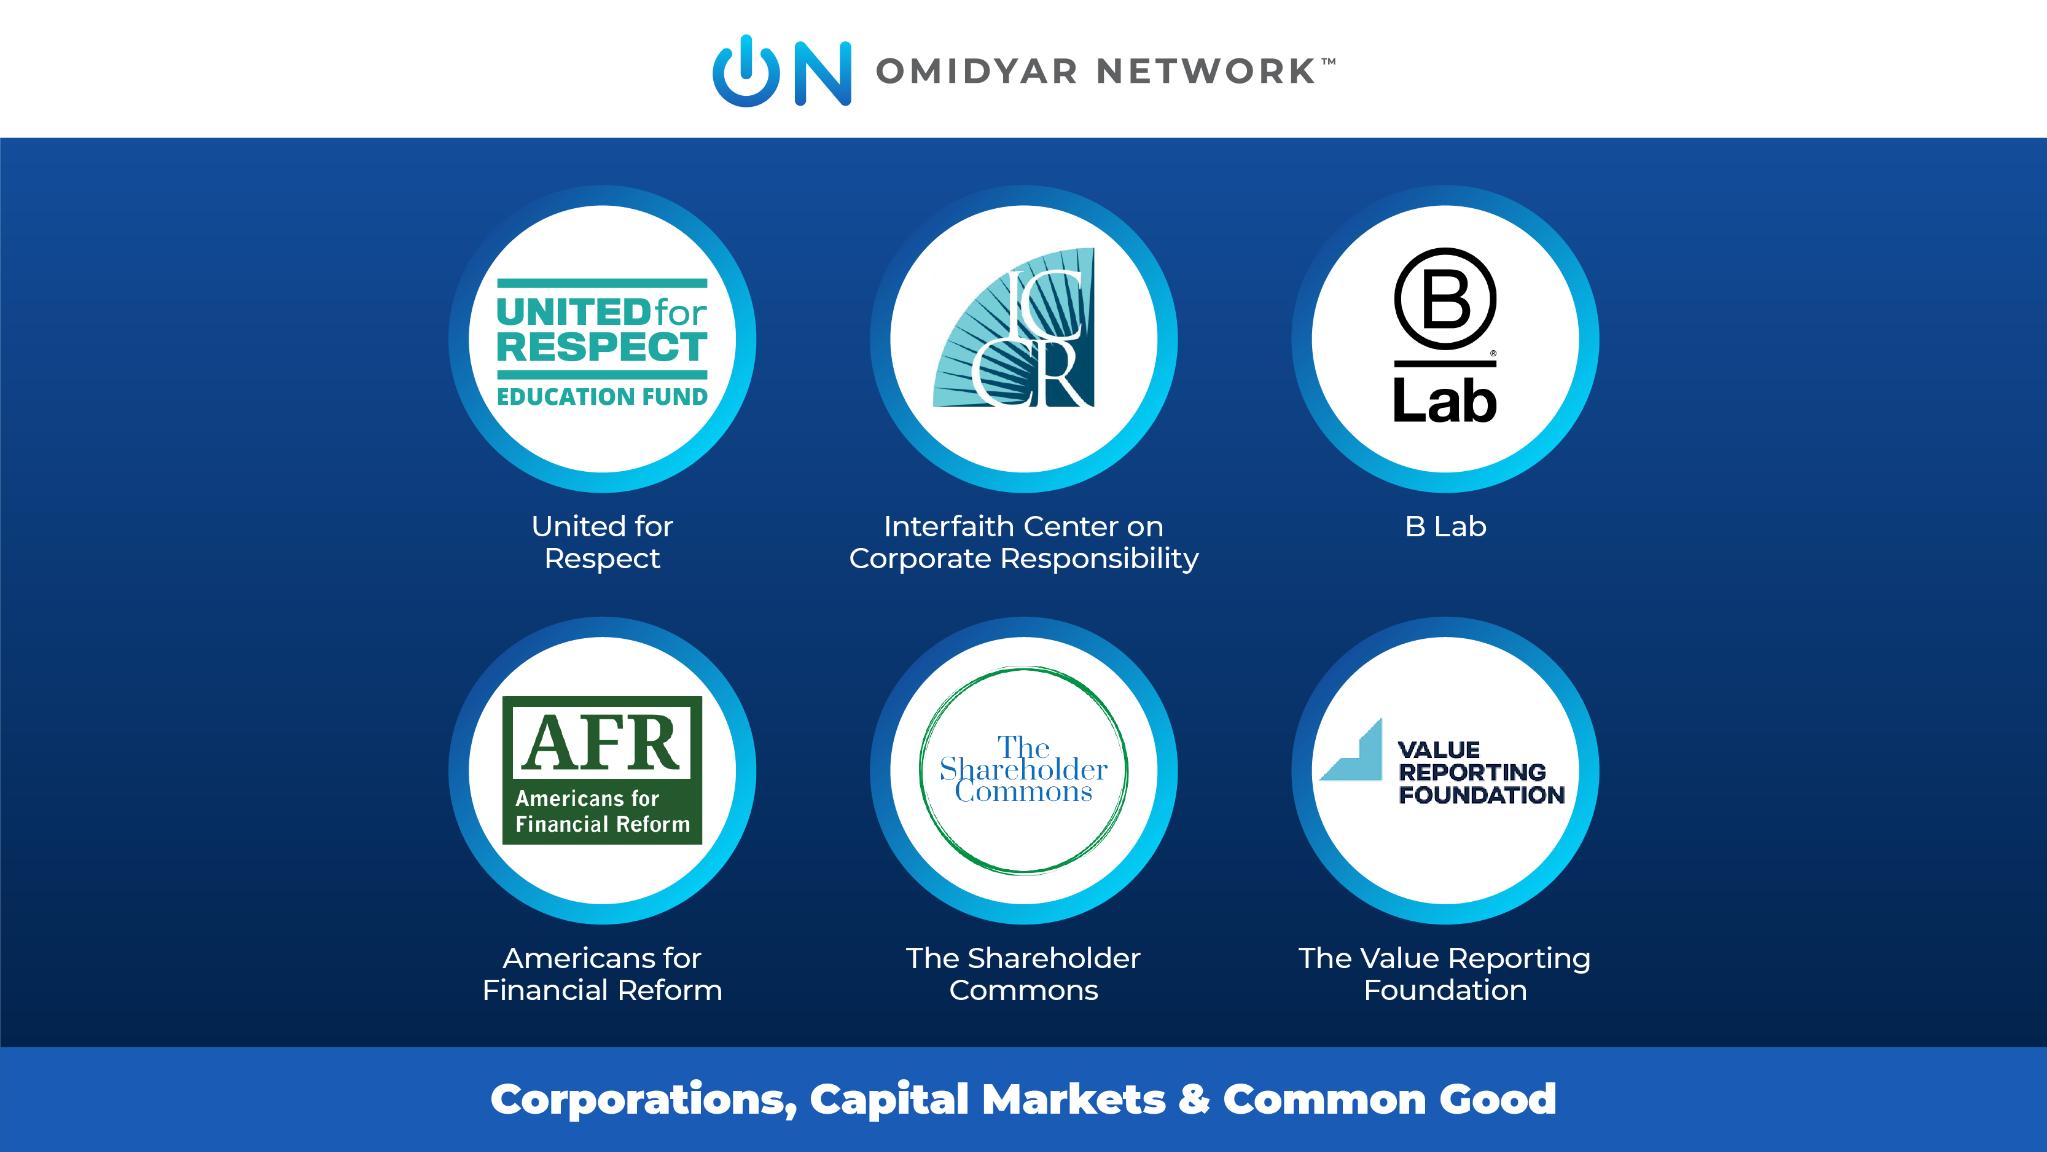 Logos for organizations we are working with, including B Lab, United for Respect, The Interfaith Center on Corporate Responsibility, The Shareholder Commons, Value Reporting Foundation, and Americans for Financial Reform.